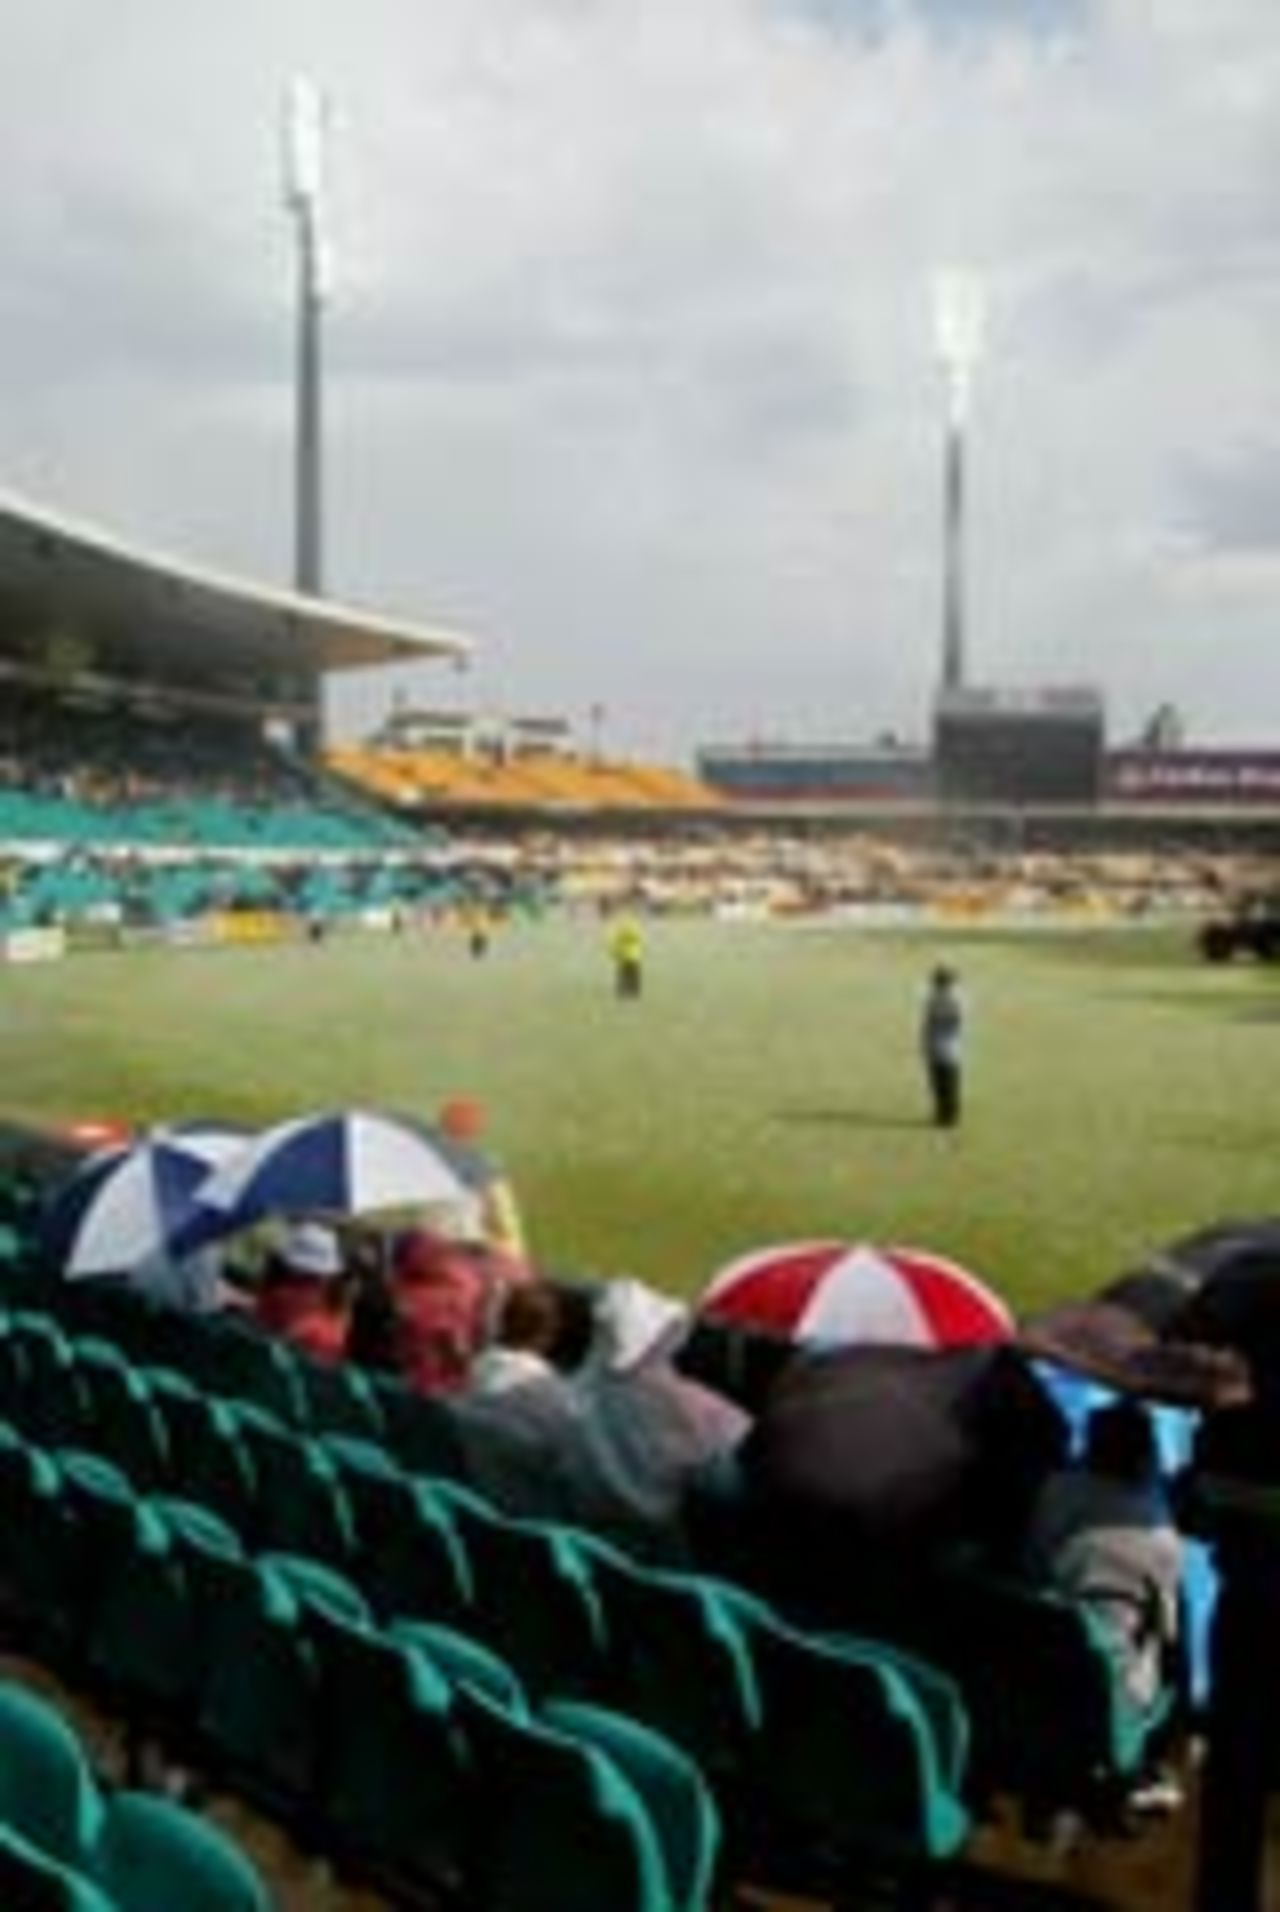 A view of the Sydney Cricket Ground, February 8, 2004